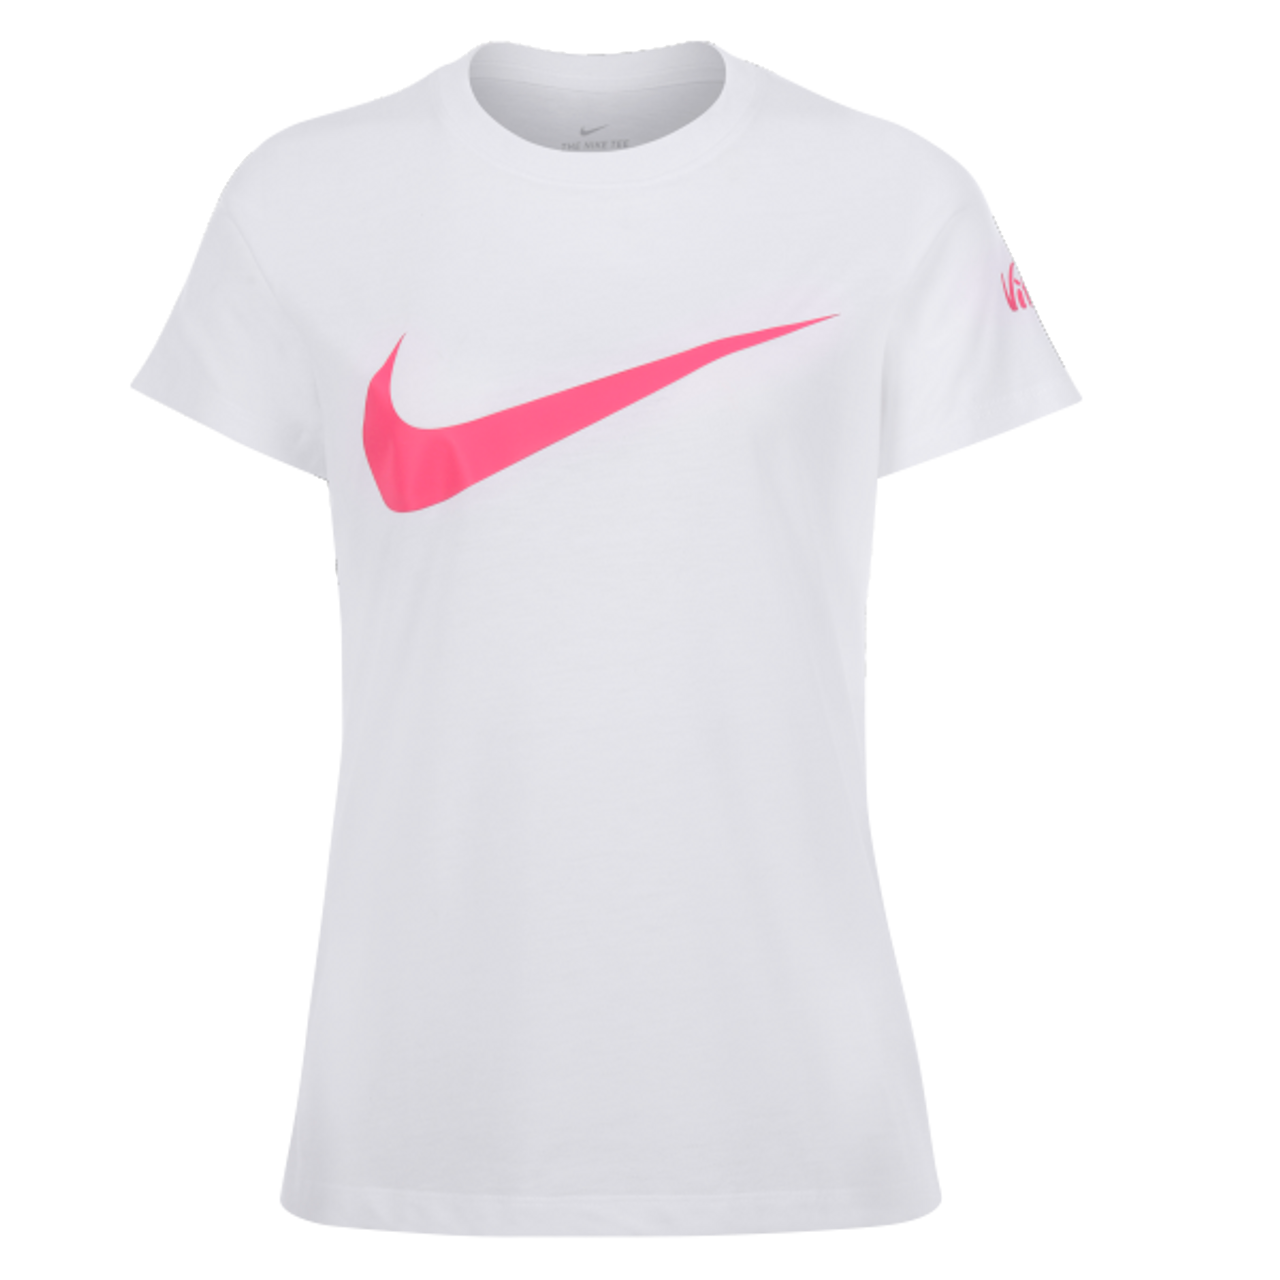 Products - Women - Clothing - Top & T-shirts - Vitality Online Store